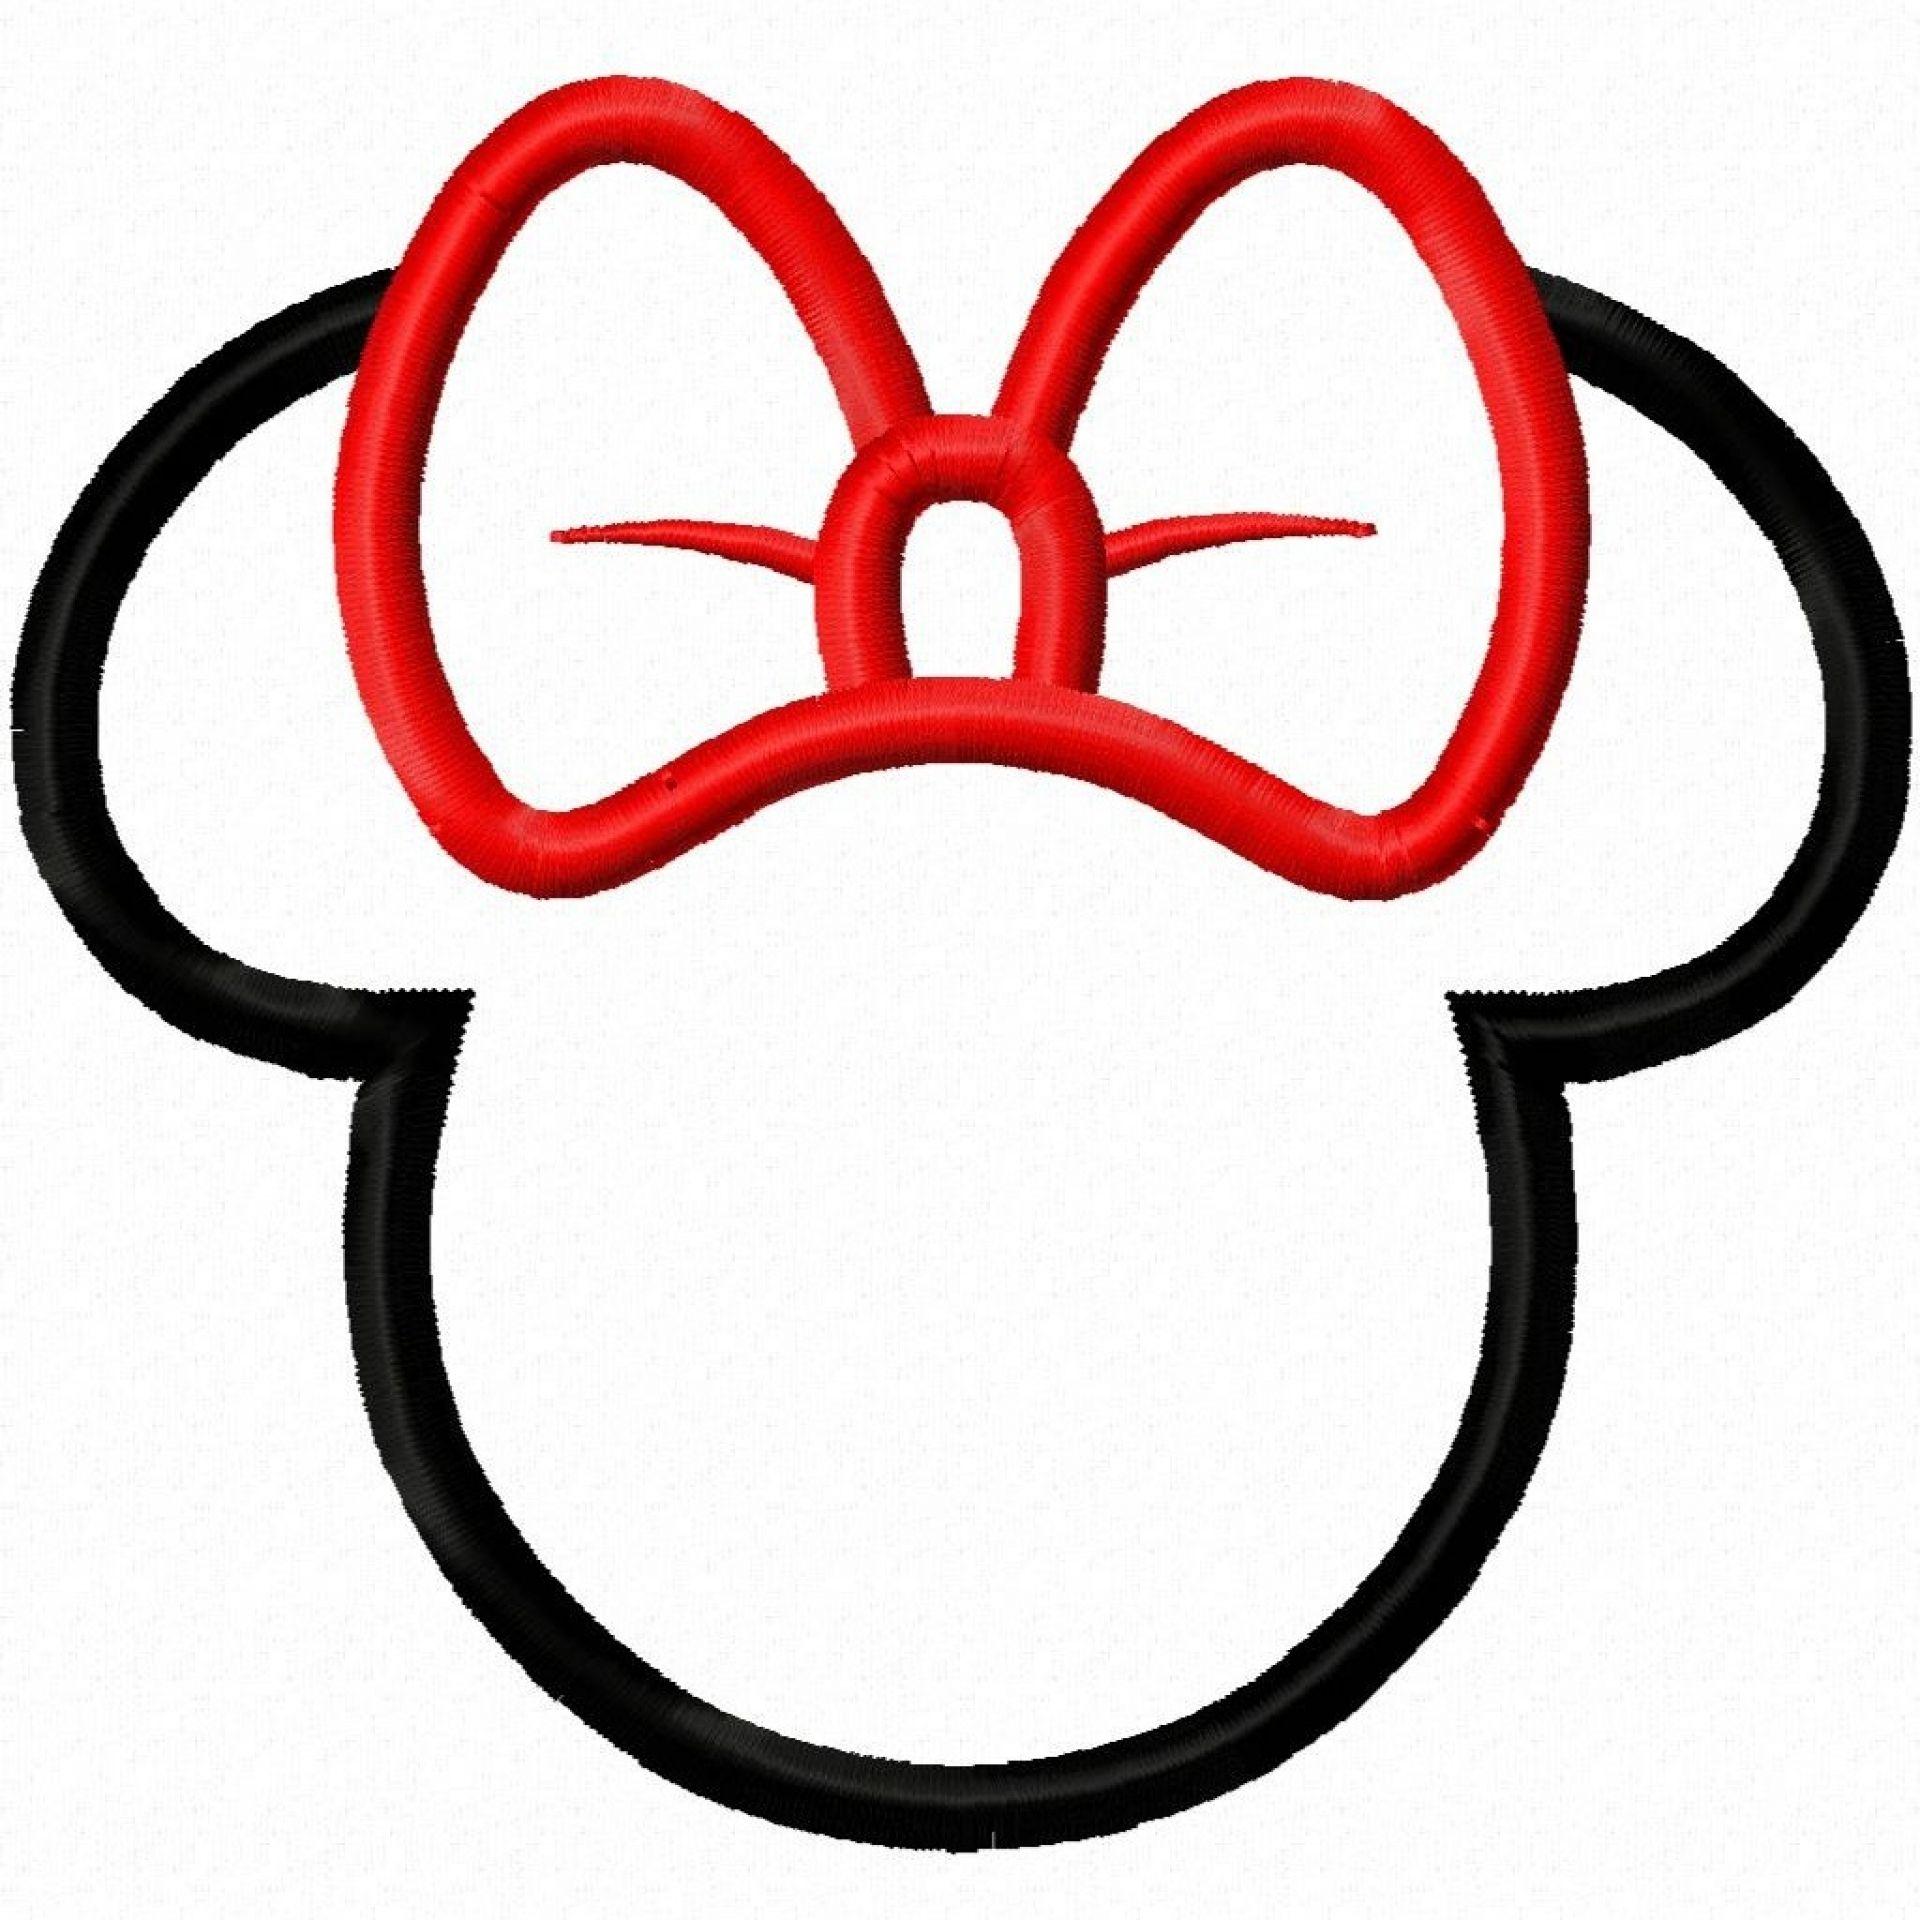 Mickey and Minnie Mouse Logo - Free Mickey Mouse Ears Clipart, Download Free Clip Art, Free Clip